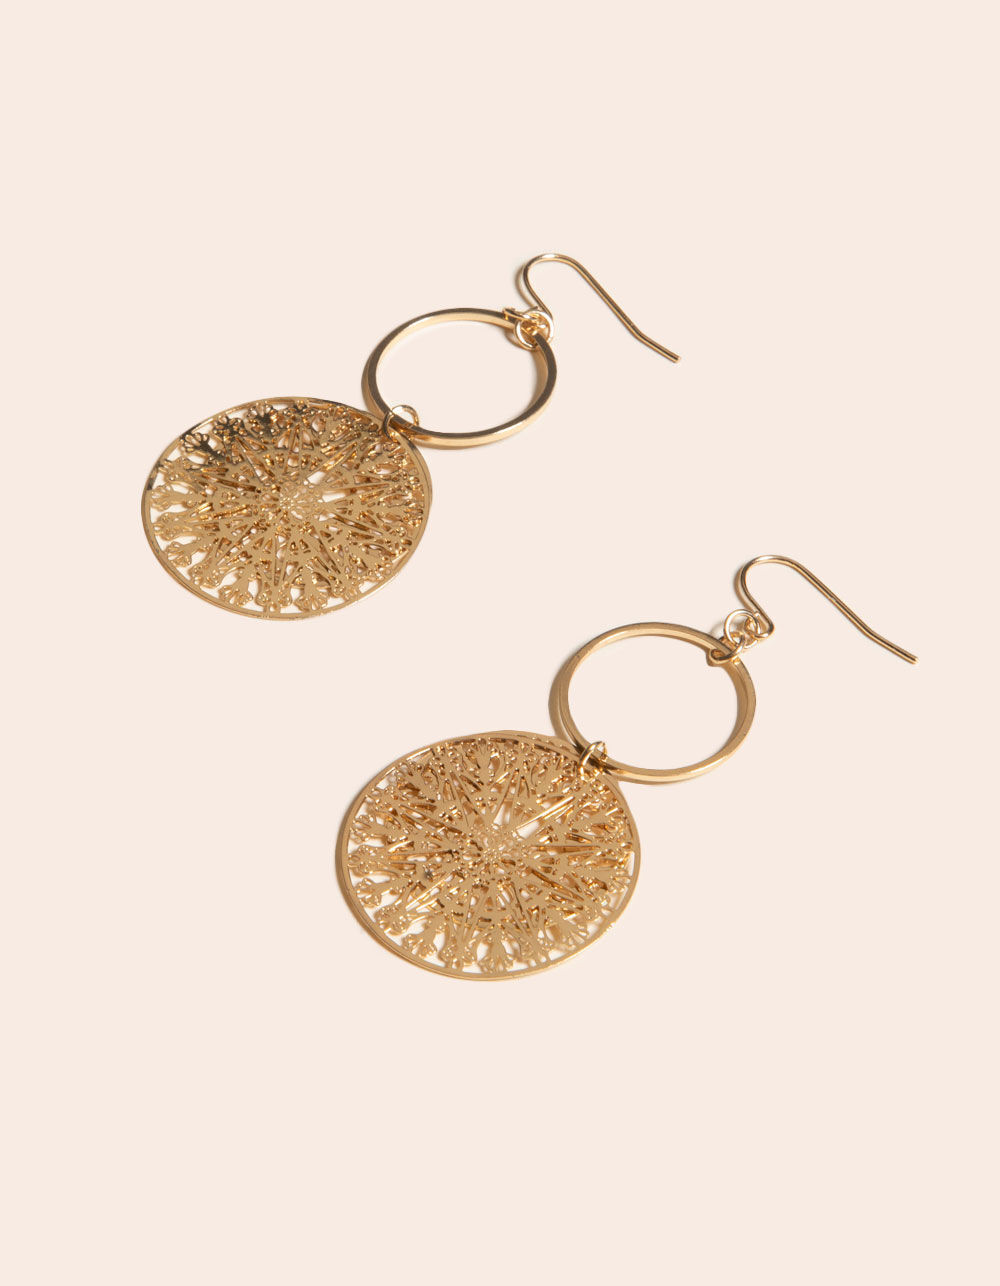 WEST OF MELROSE Filigree Round Earrings image number 0